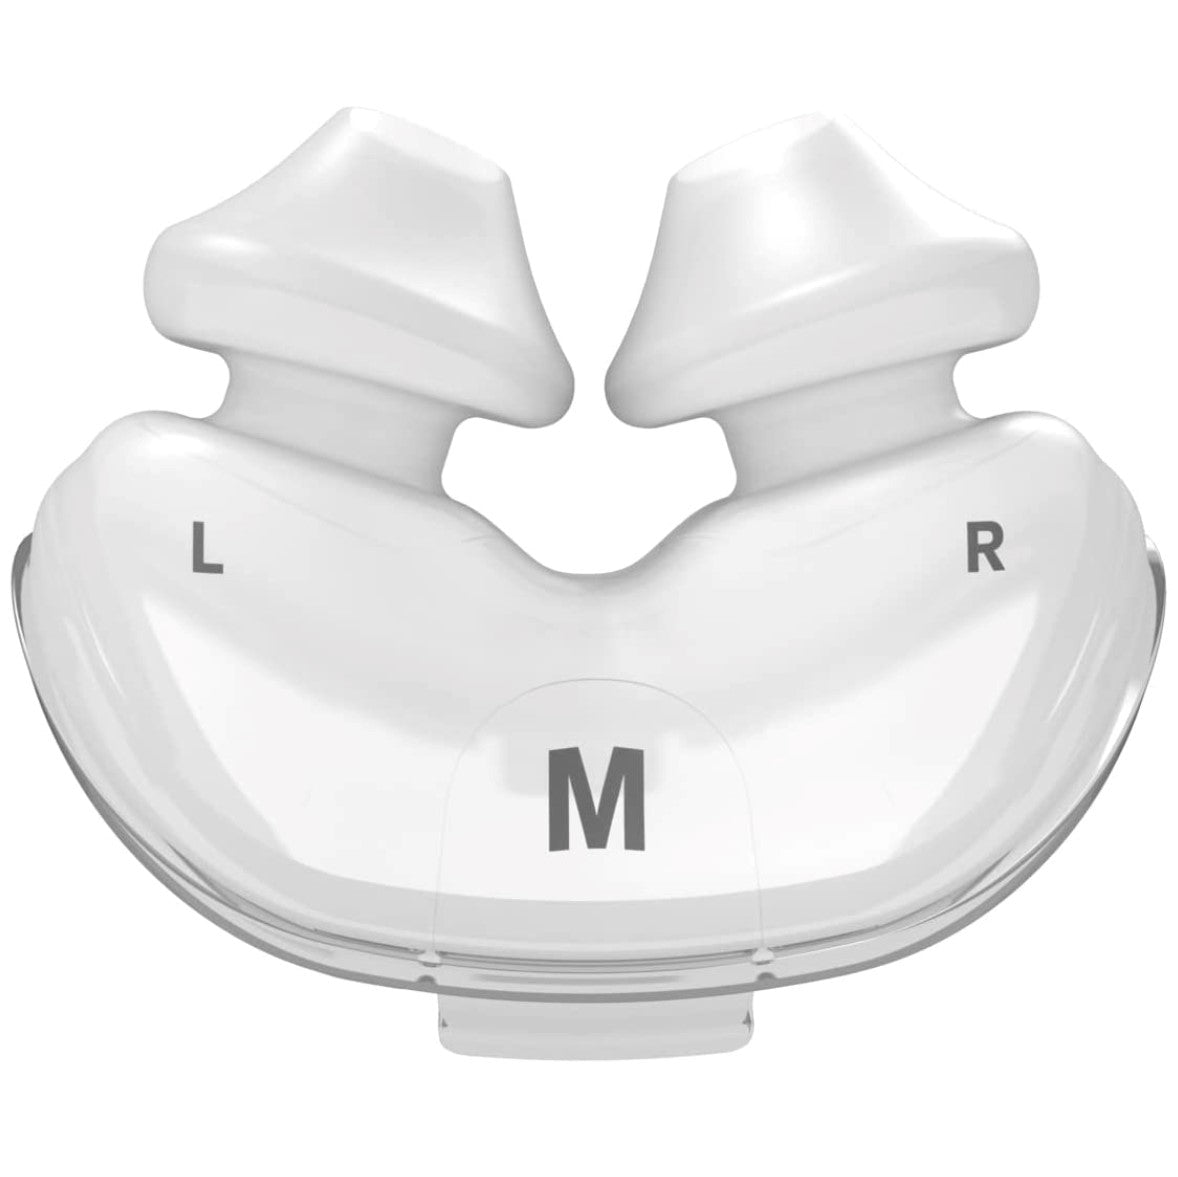 CPAP Mask Parts & Accessories